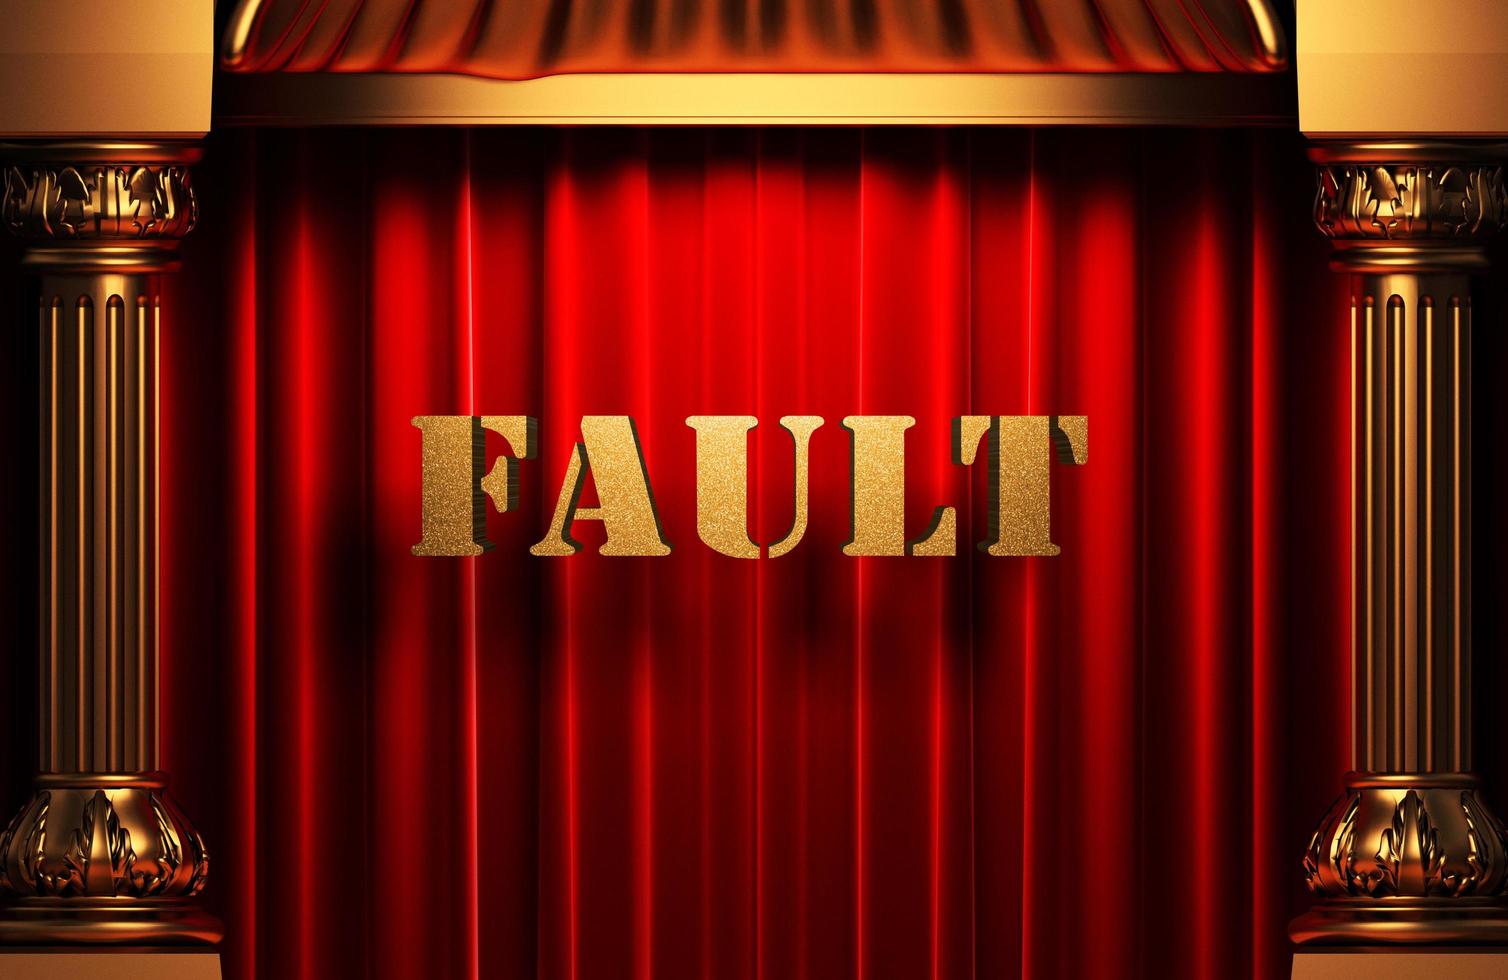 fault golden word on red curtain photo